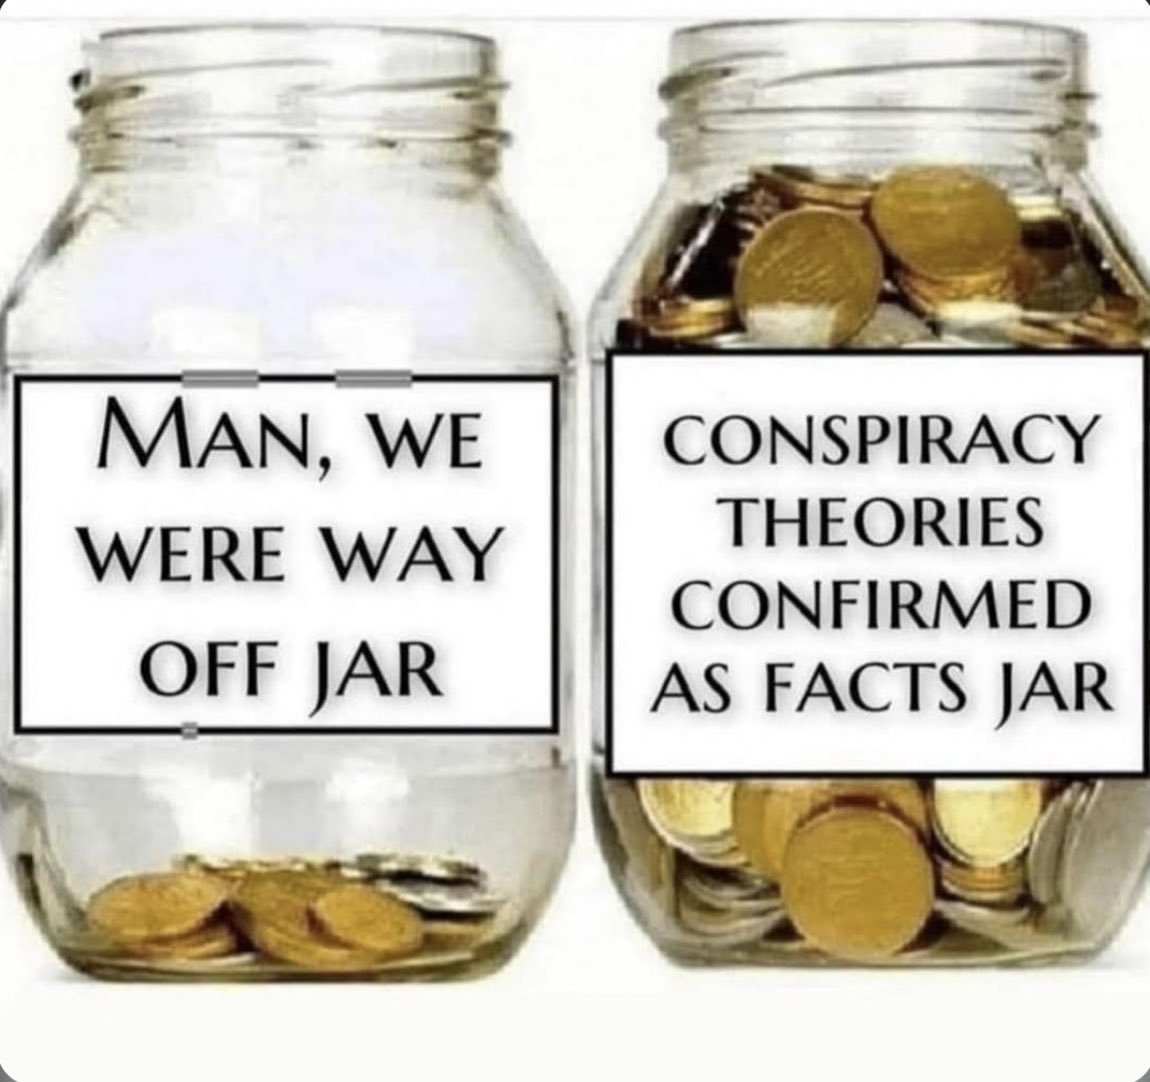 “Conspiracy theories”